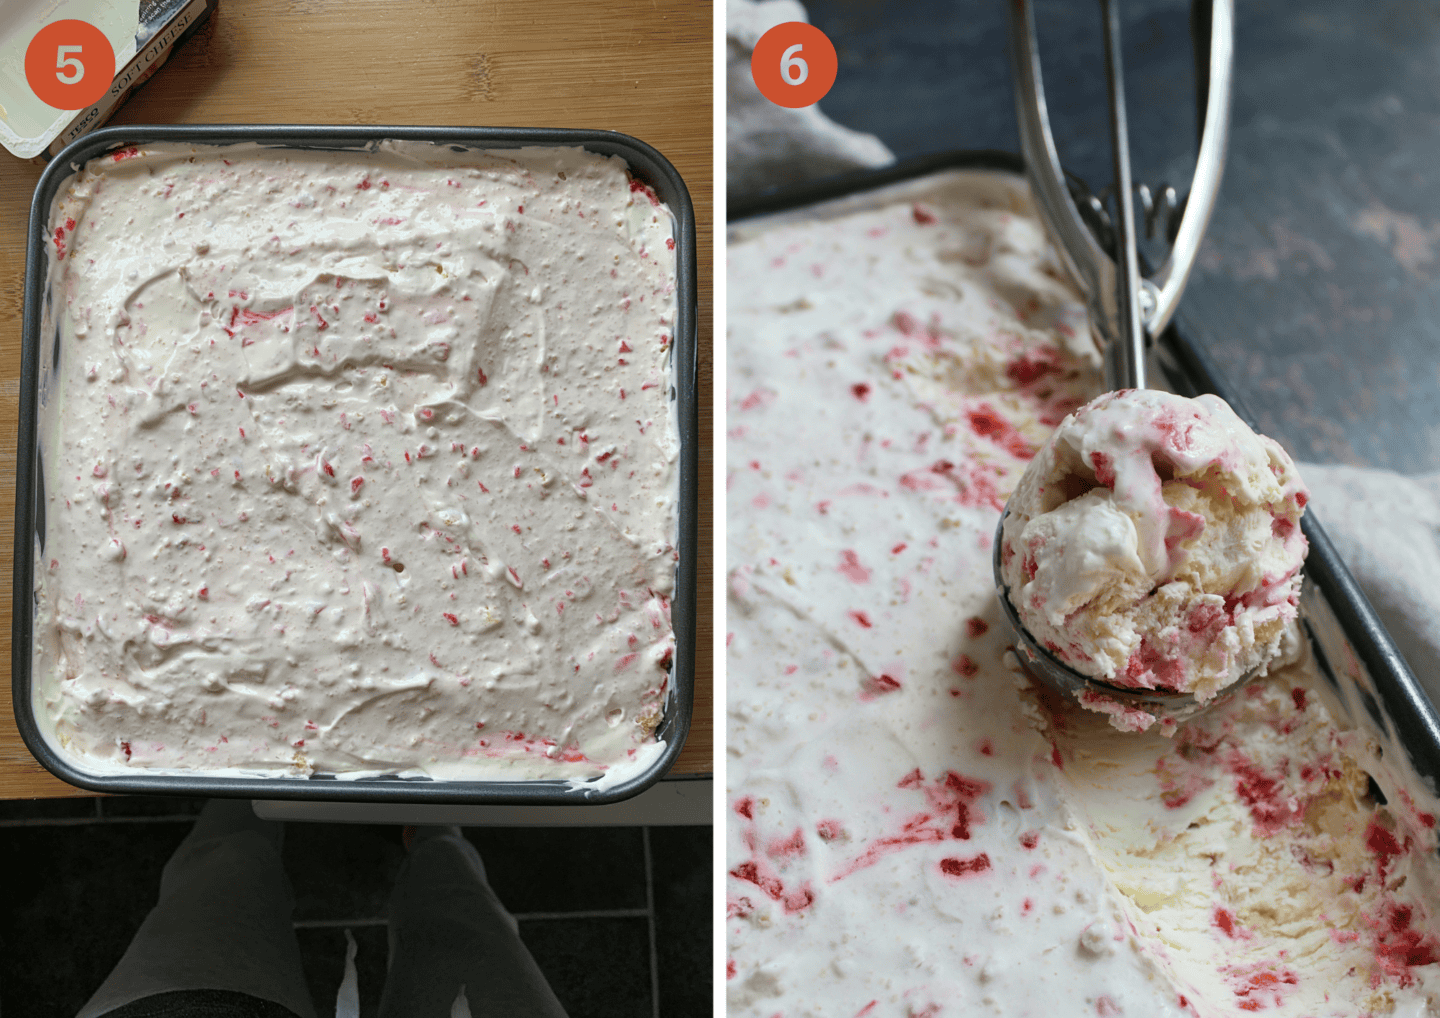 The strawberry cheesecake ice-cream mixture frozen (left) and in a scoop (right).